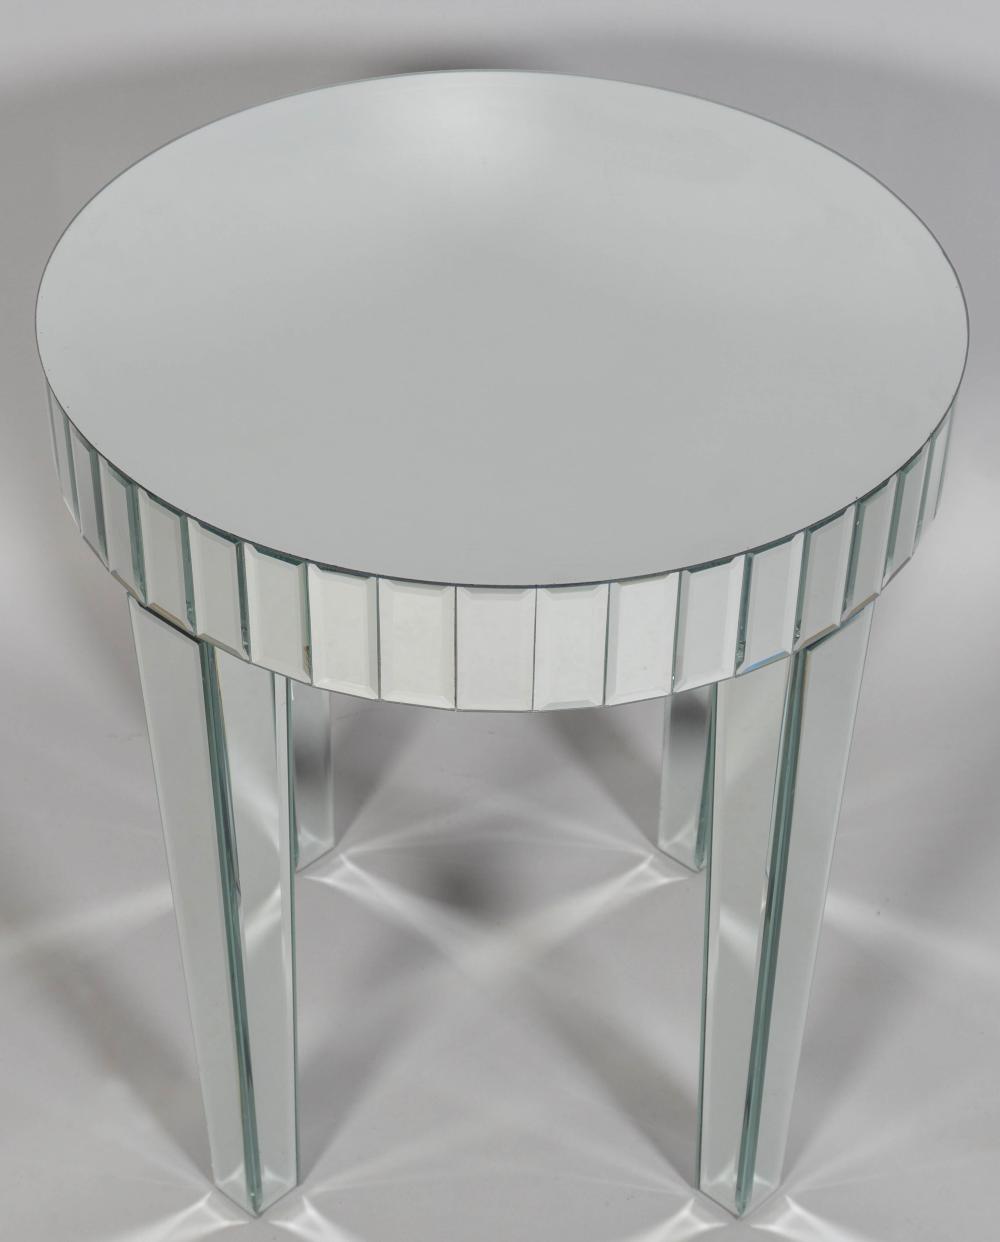 CONTEMPORARY MIRRORED SIDE TABLE